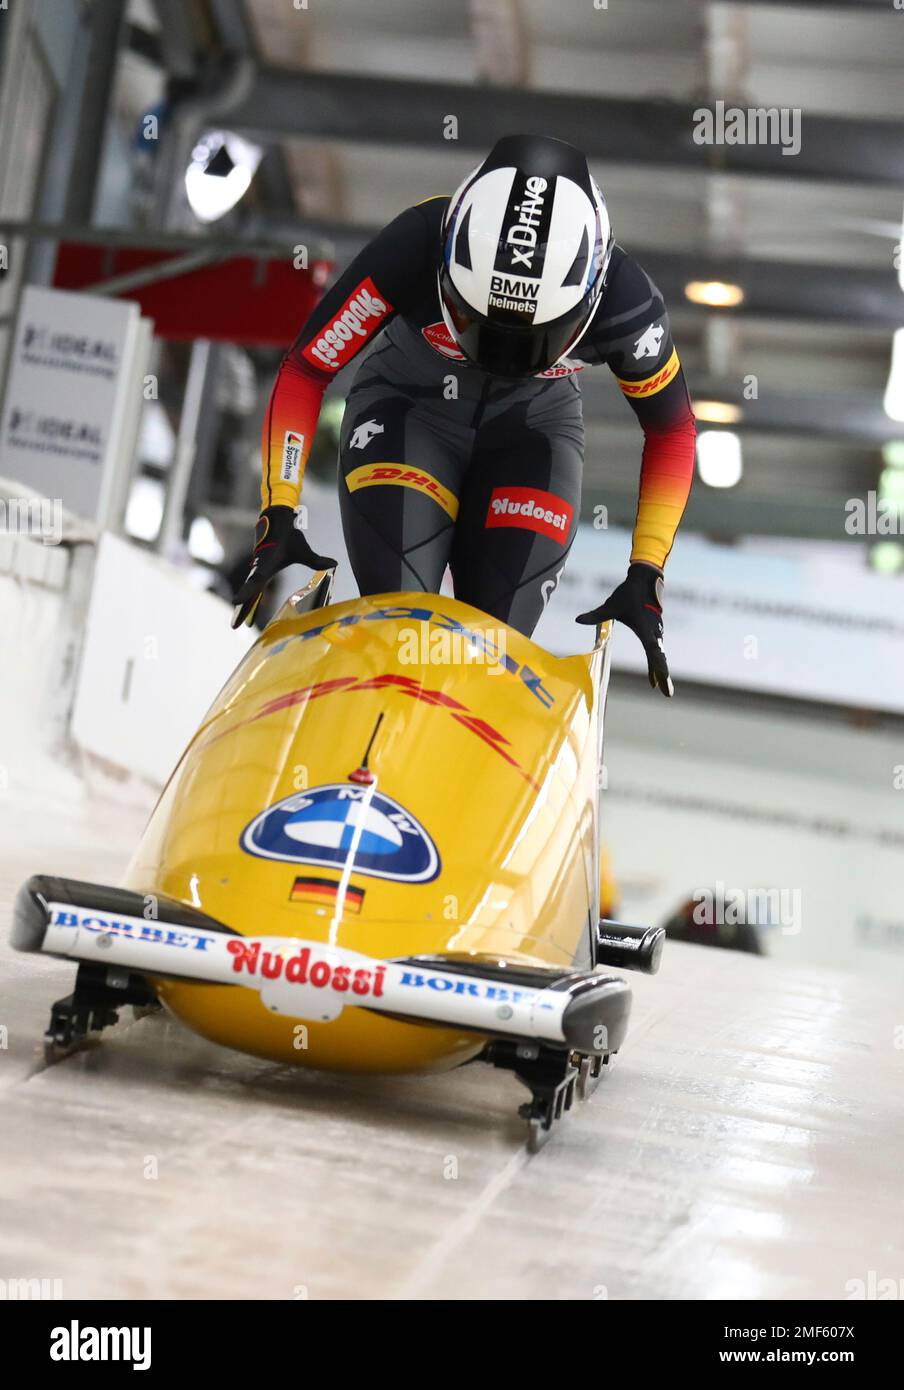 Germanys bobsleigh pilot Mariama Jamanka at the start of the womens monobob race at the Bobsleigh and Skeleton World Championships in Altenberg, Germany, Saturday, Feb.13, 2021